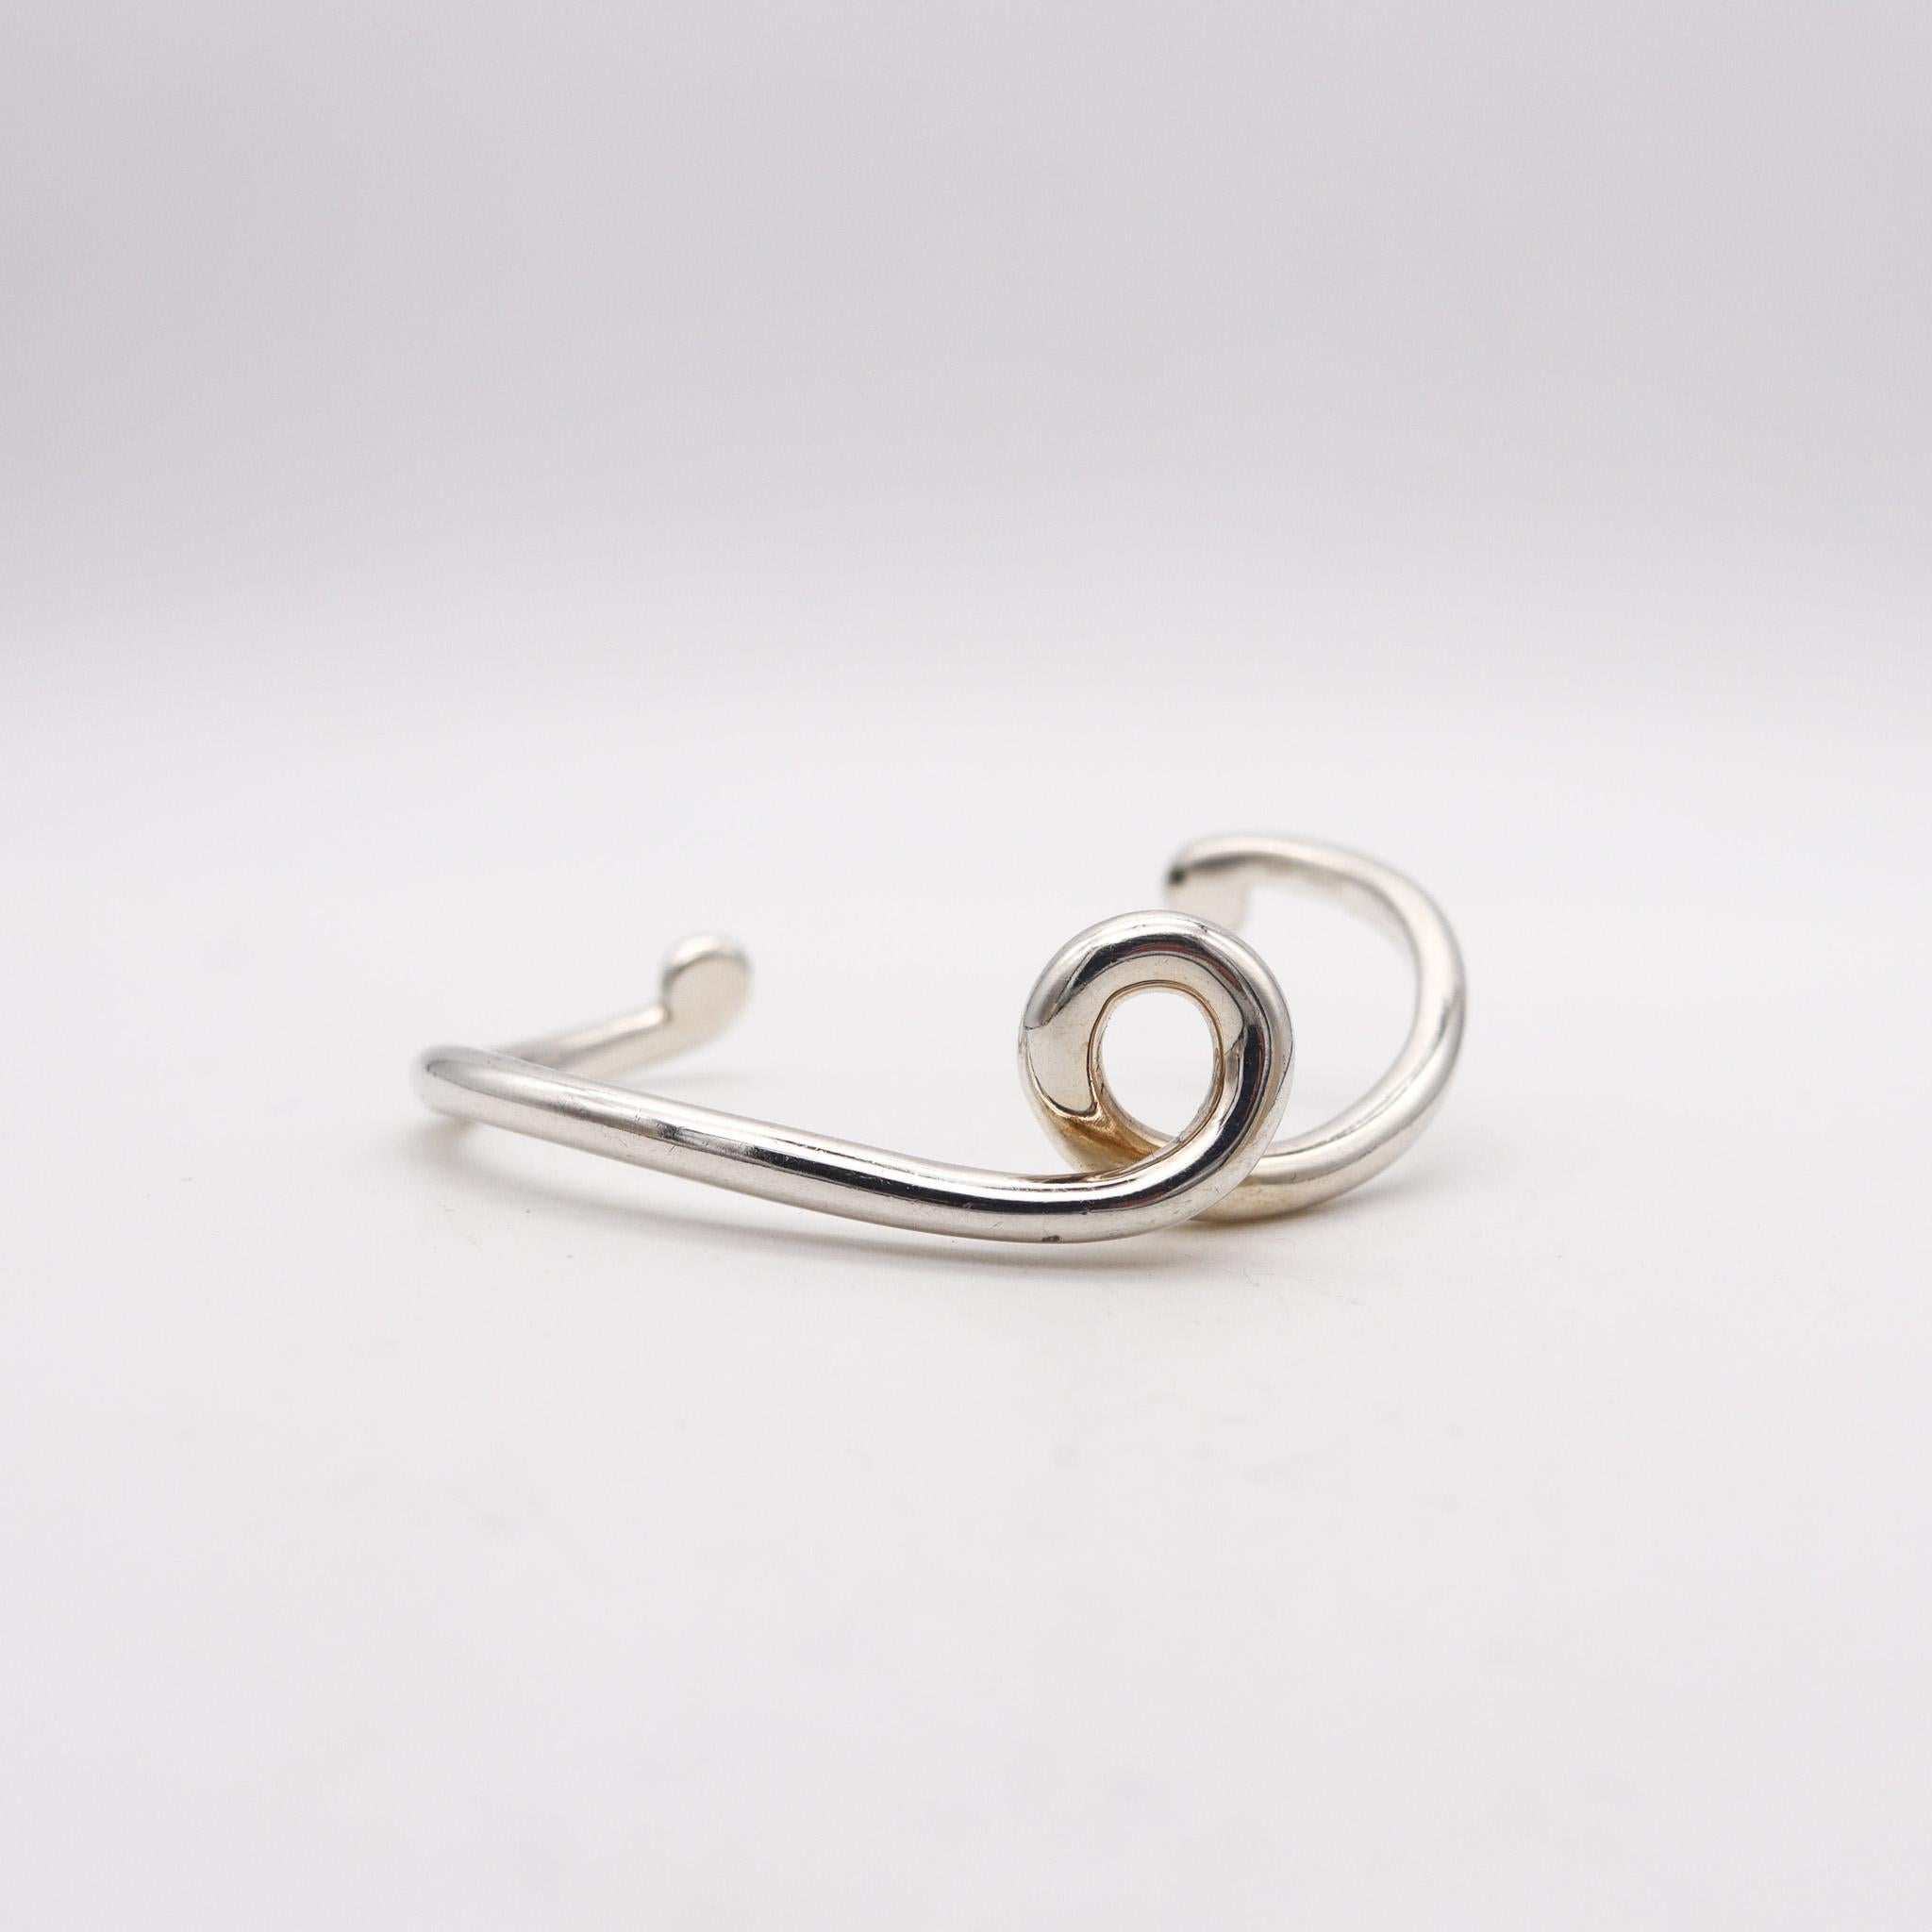 Free form cuff-bracelet designed by Angela Cummings.

Beautiful sculptural cuff bracelet, created by Angela Cummings at her own goldsmith studio in New York city, back in the 1990. This piece has been designed with modernist patterns as a twisted